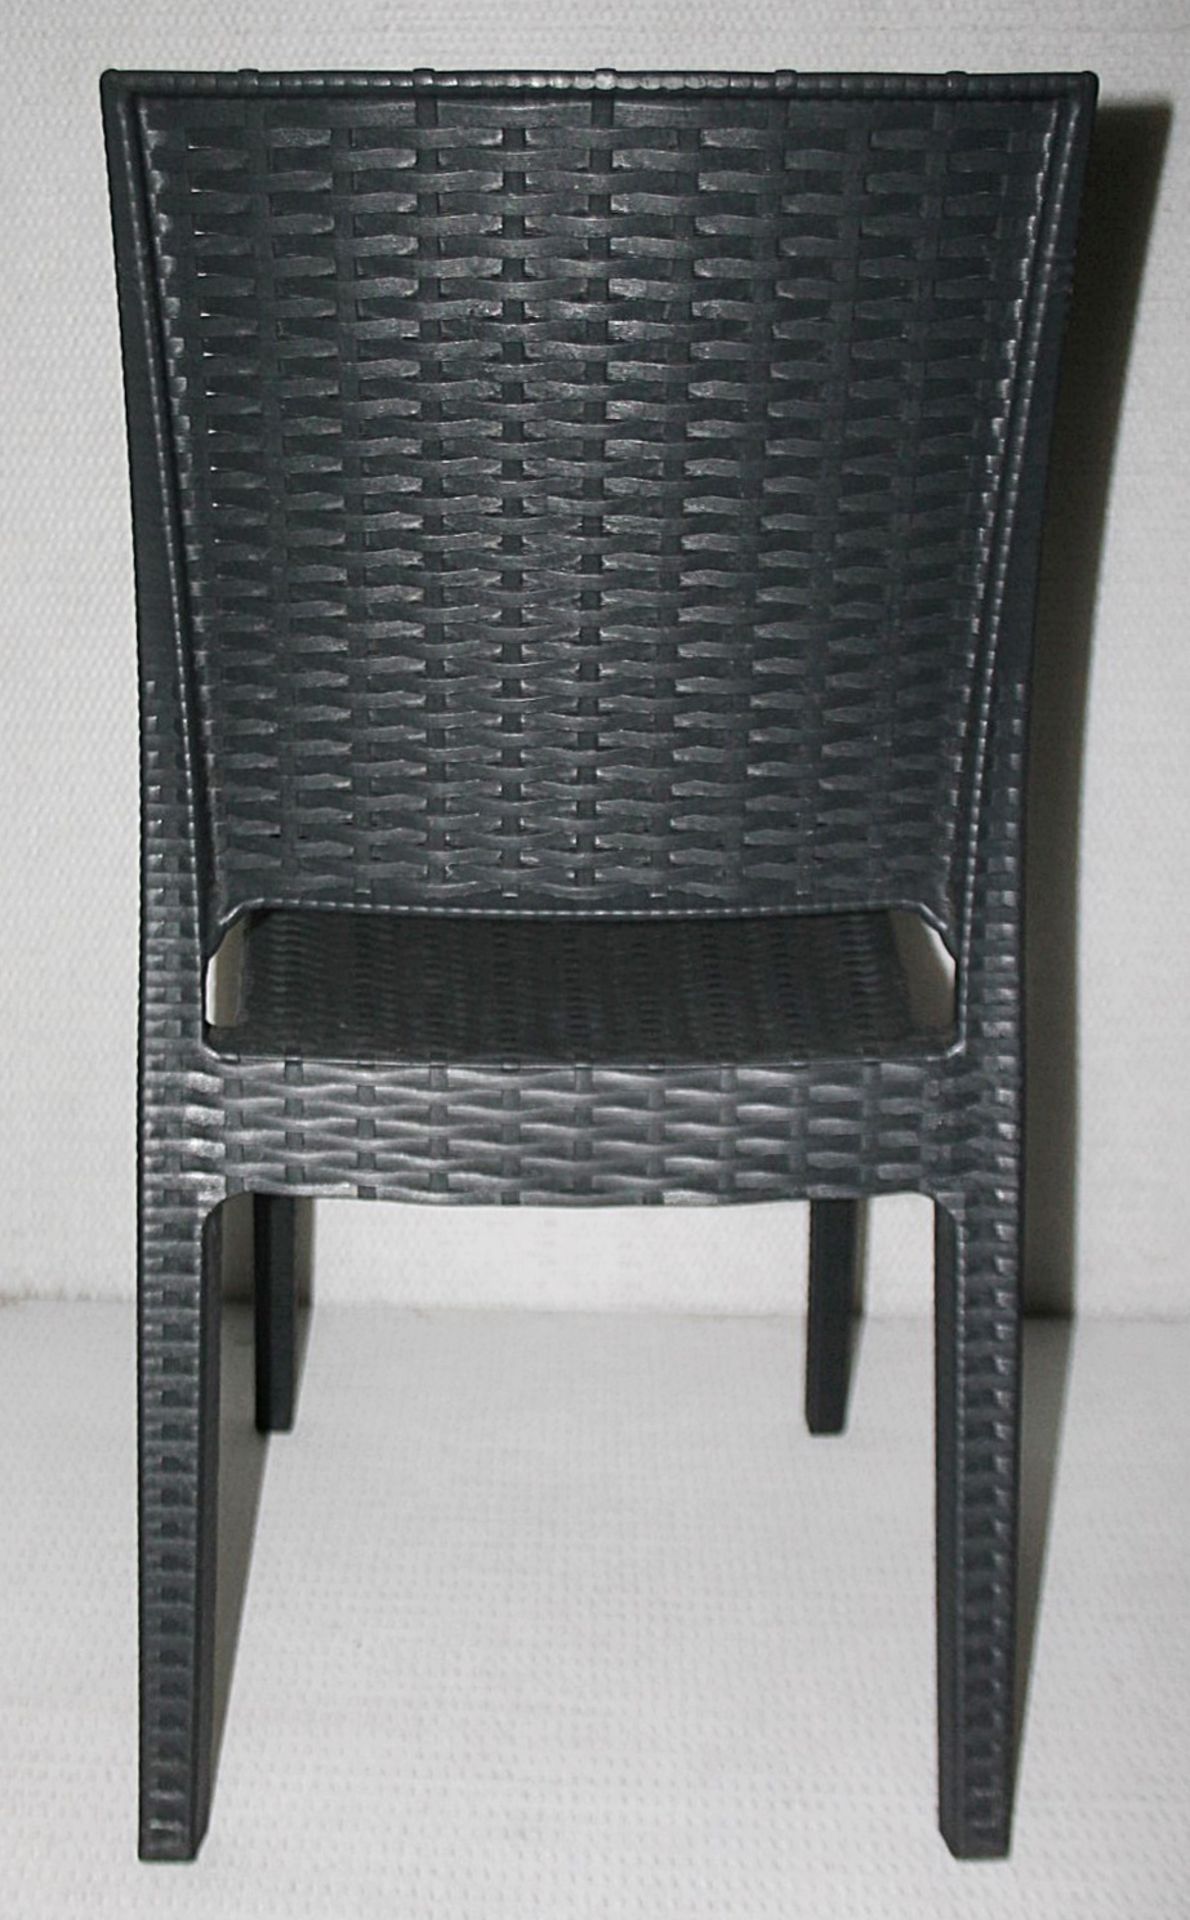 4 x SIESTA EXCLUSIVE 'Florida' Commercial Stackable Rattan-style Chairs In Dark Grey - RRP £320.00 - Image 3 of 13